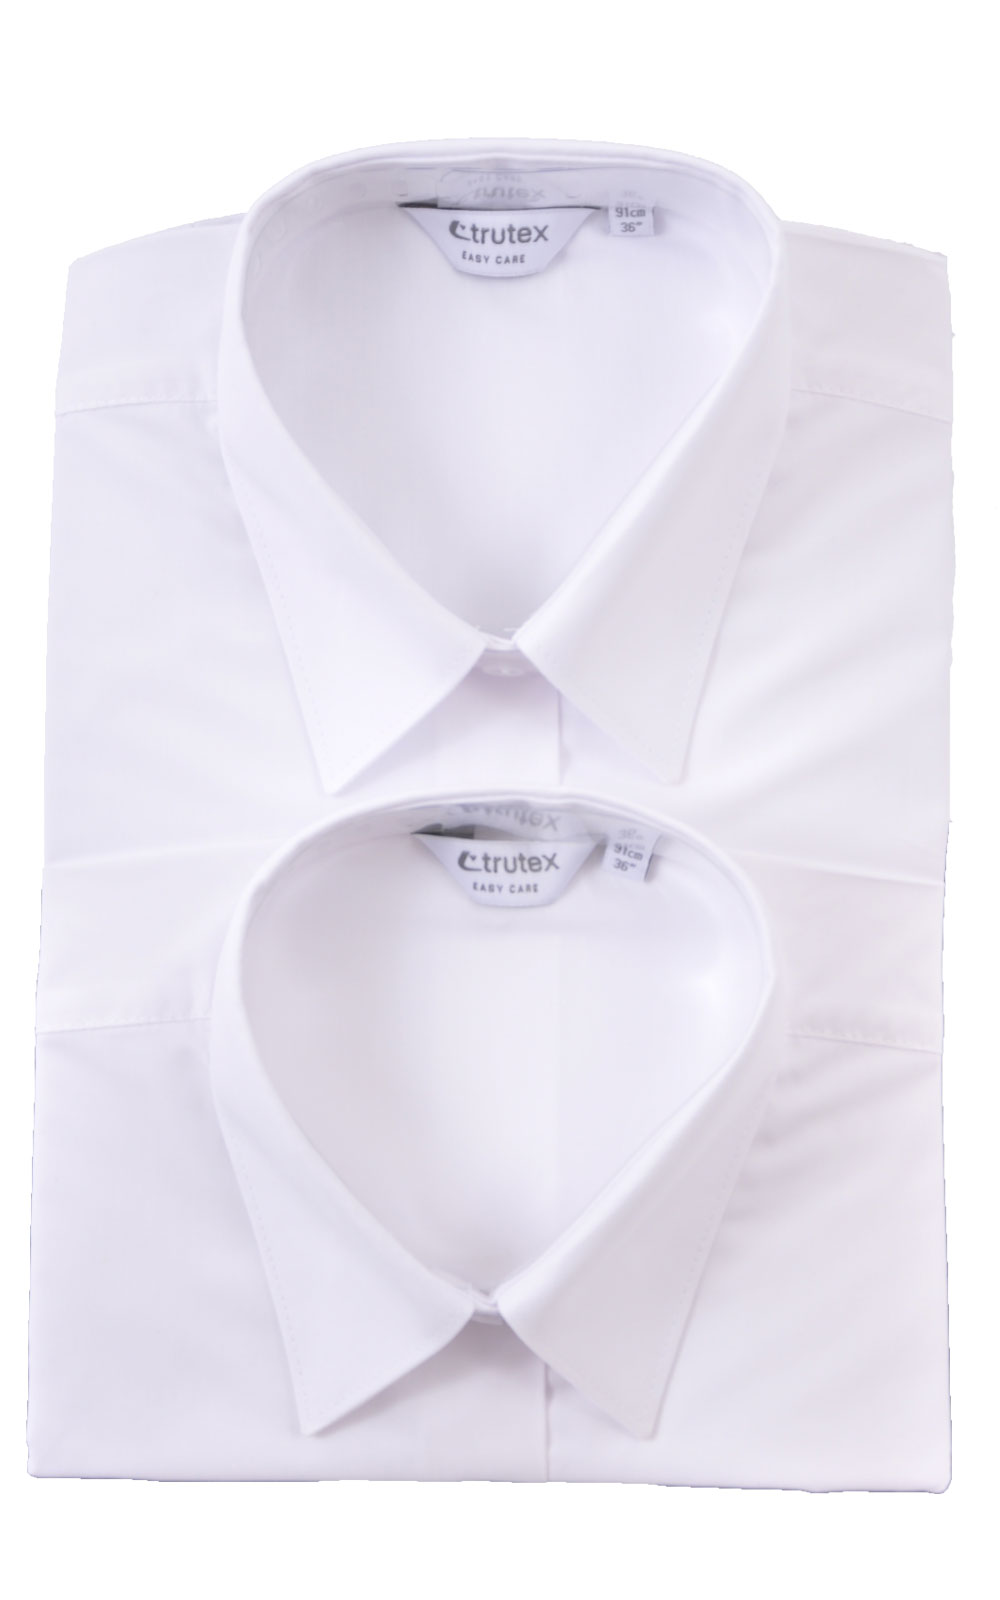 Picture of Plain White Short Sleeved Blouse Twin Pack - Trutex